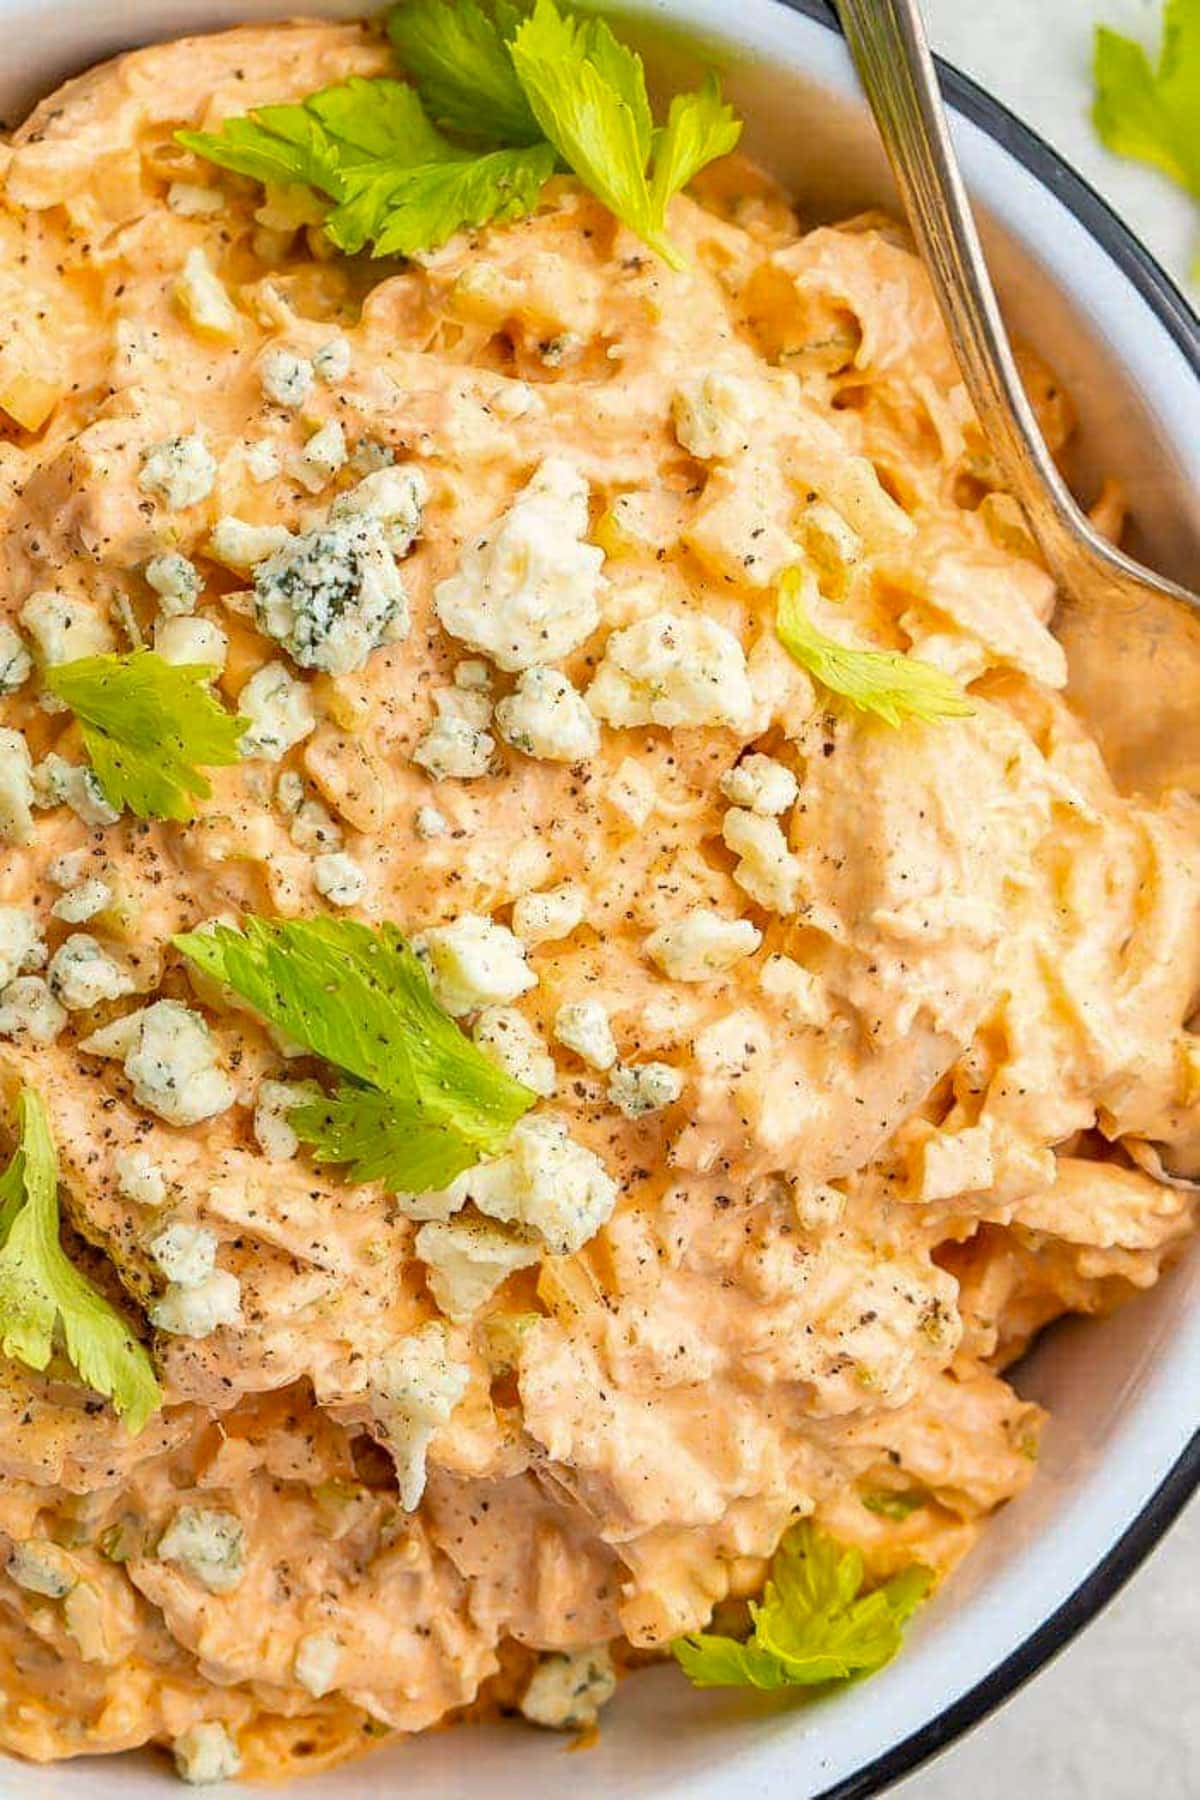 A large bowl filled with creamy buffalo chicken salad topped with blue cheese crumbles and fresh herbs.